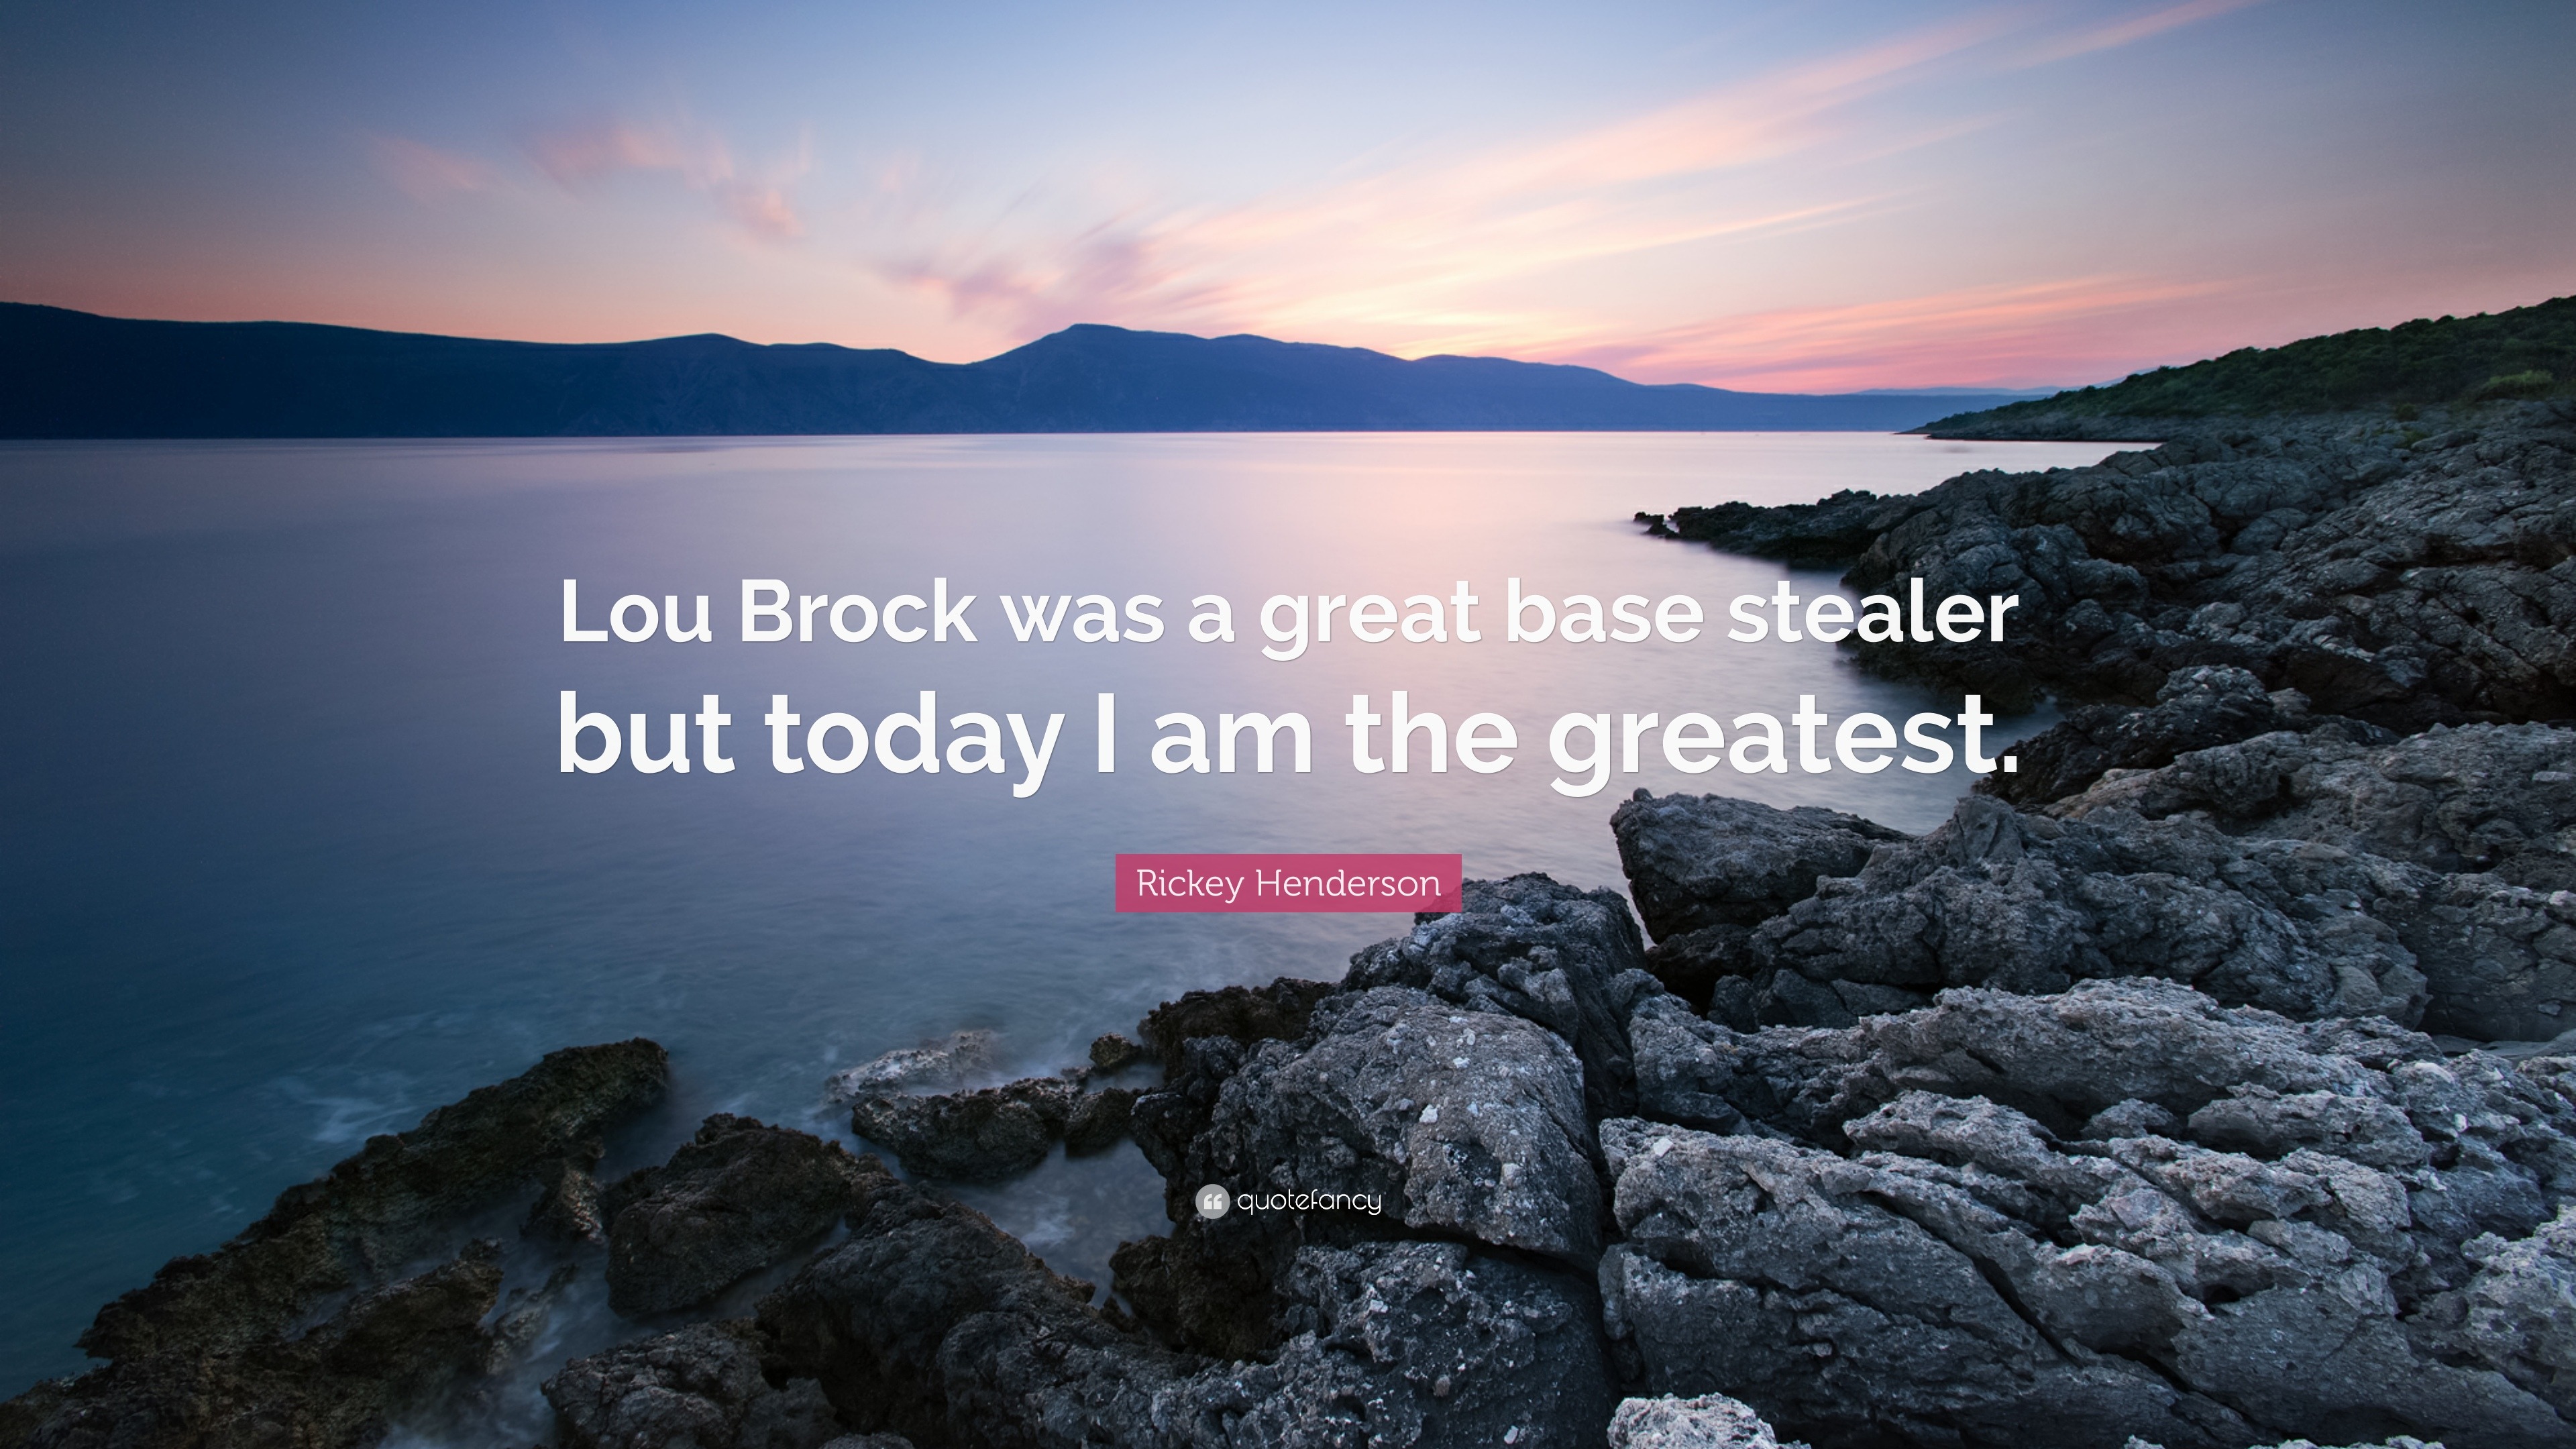 Rickey Henderson Quote: “Lou Brock was a great base stealer but